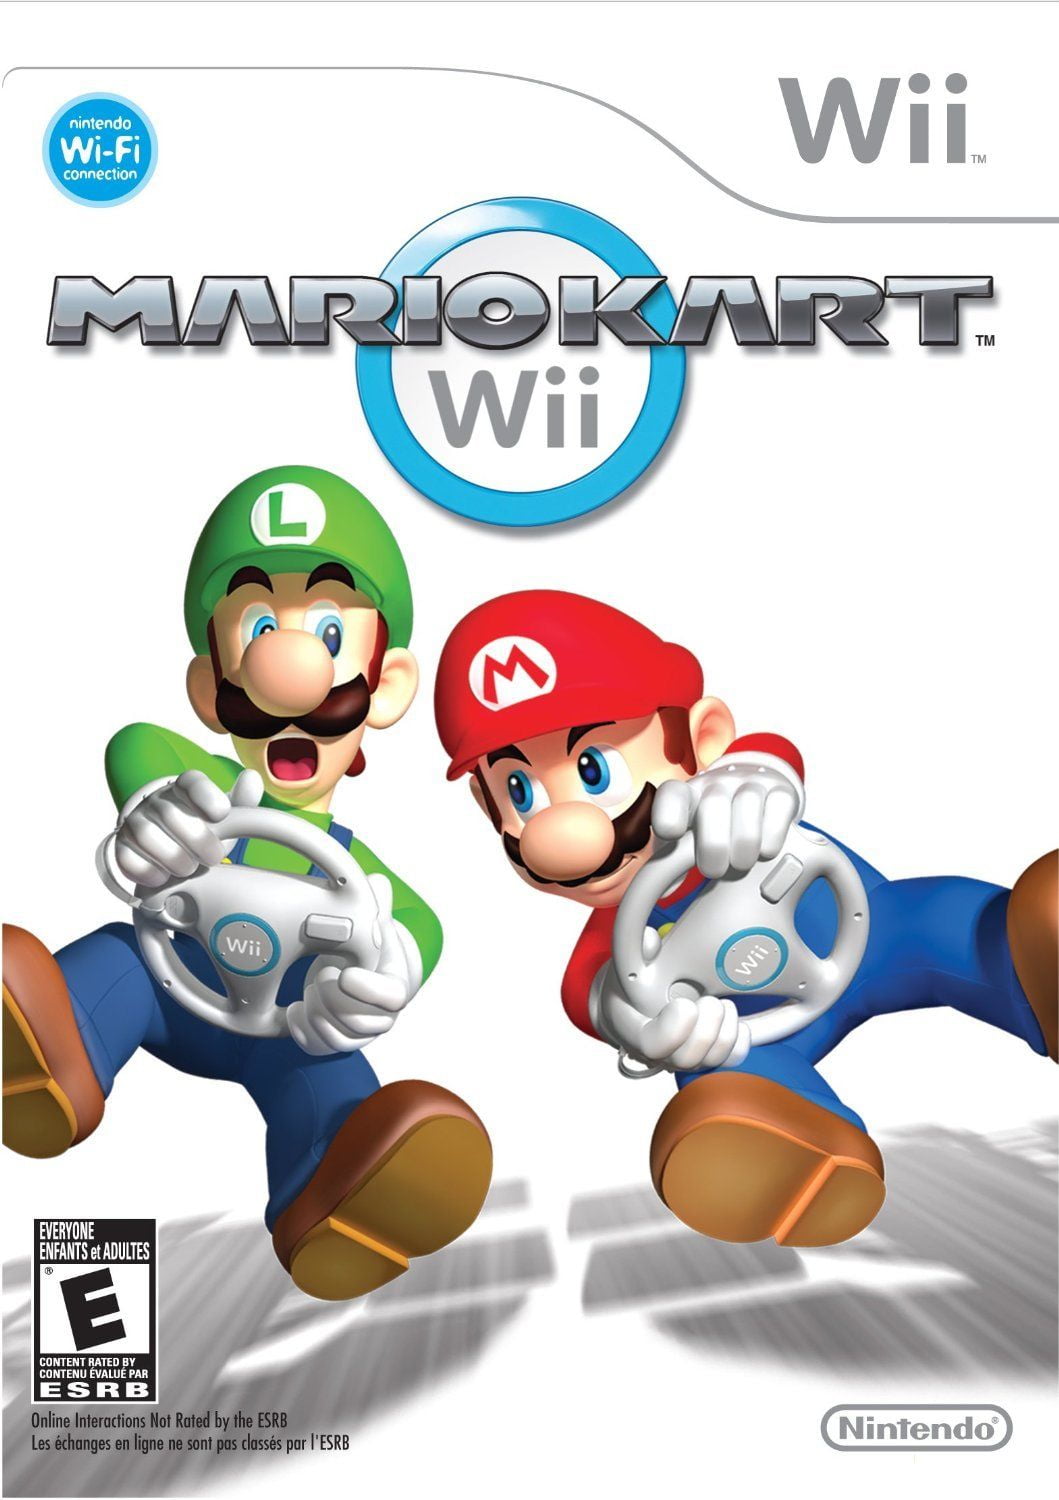 Mario Kart Wii - Plugged In